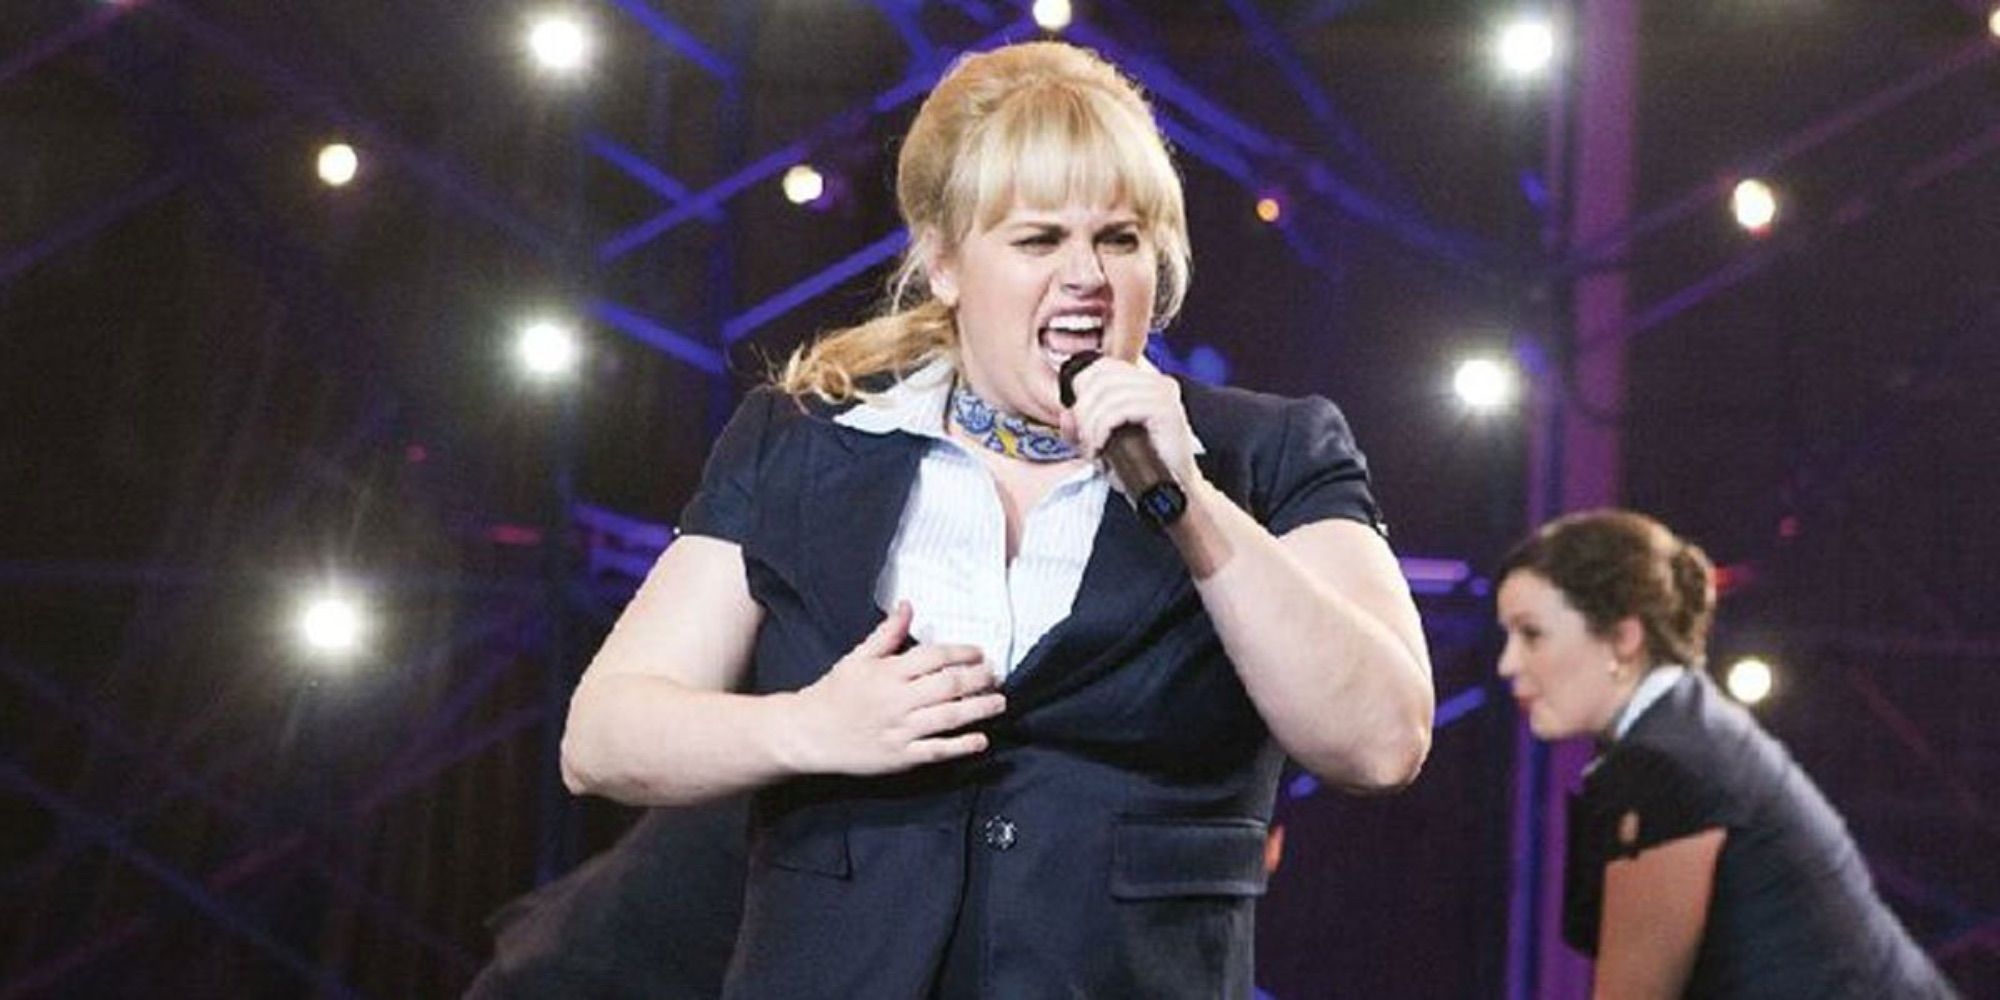 Patricia Hobart “Fat Amy” in Pitch Perfect